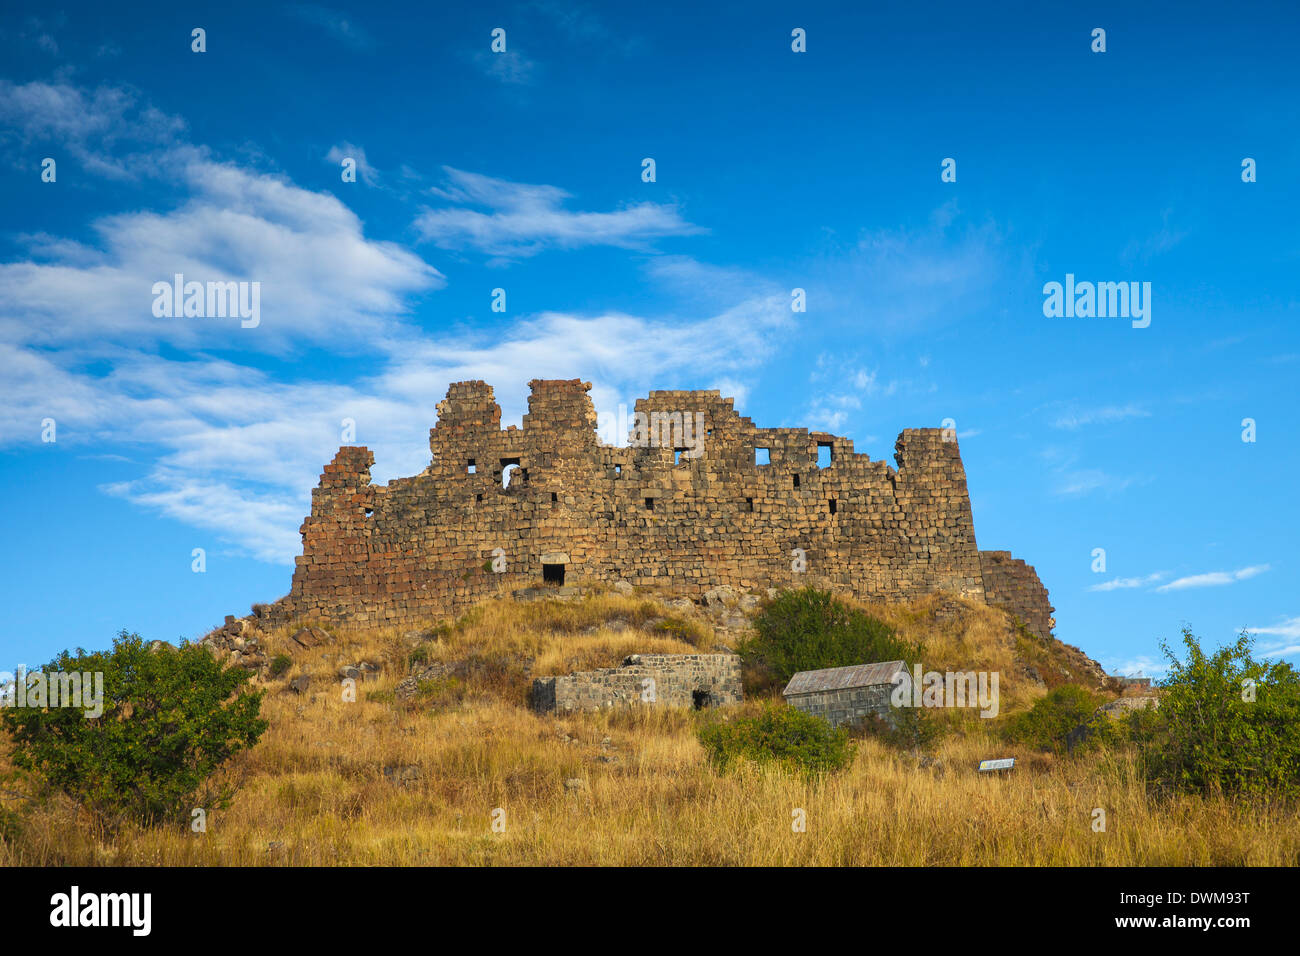 Amberd fortress located on the slopes of Mount Aragats, Yerevan, Aragatsotn, Armenia, Central Asia, Asia Stock Photo